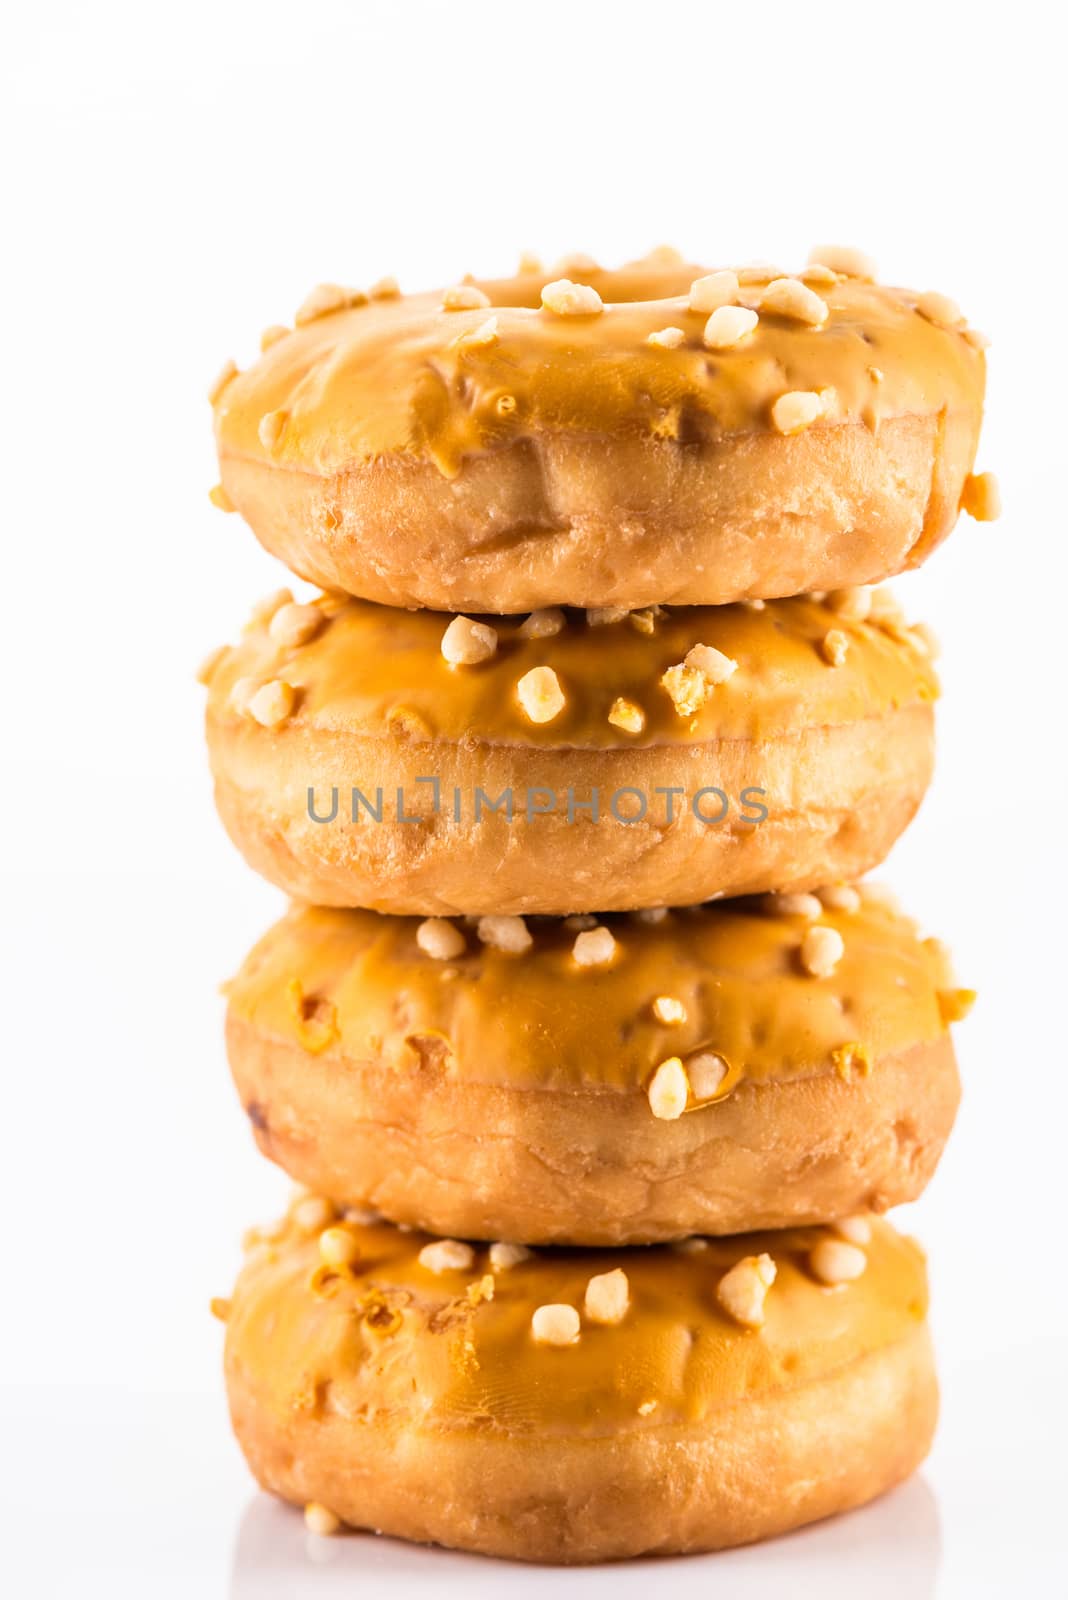 Salted Caramel Donut or Dougnut Tower on White Background.